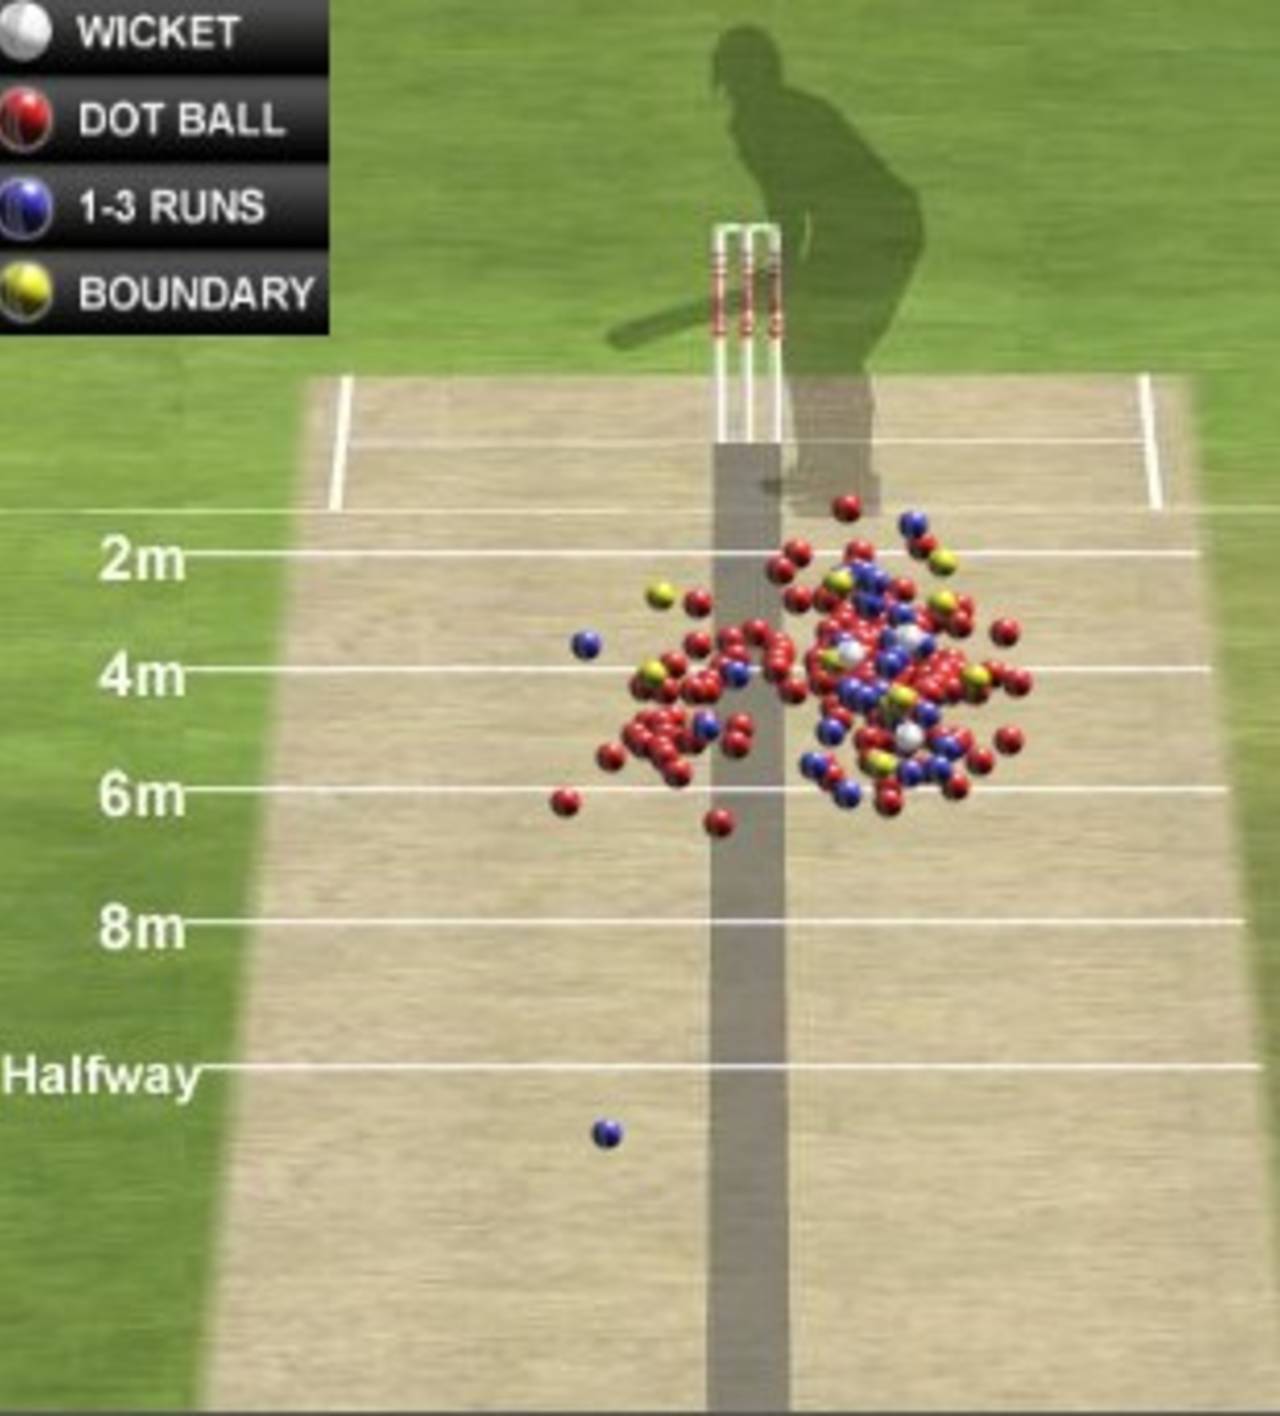 Paul Harris pitched deliveries liberally outside leg stump, and that strategy suited South Africa perfectly (<a href="/indvrsa2010/engine/match/441825.html?view=hawkeye" target="_blank">Click here</a> for more Hawk-Eye analysis)&nbsp;&nbsp;&bull;&nbsp;&nbsp;Hawk-Eye Innovations